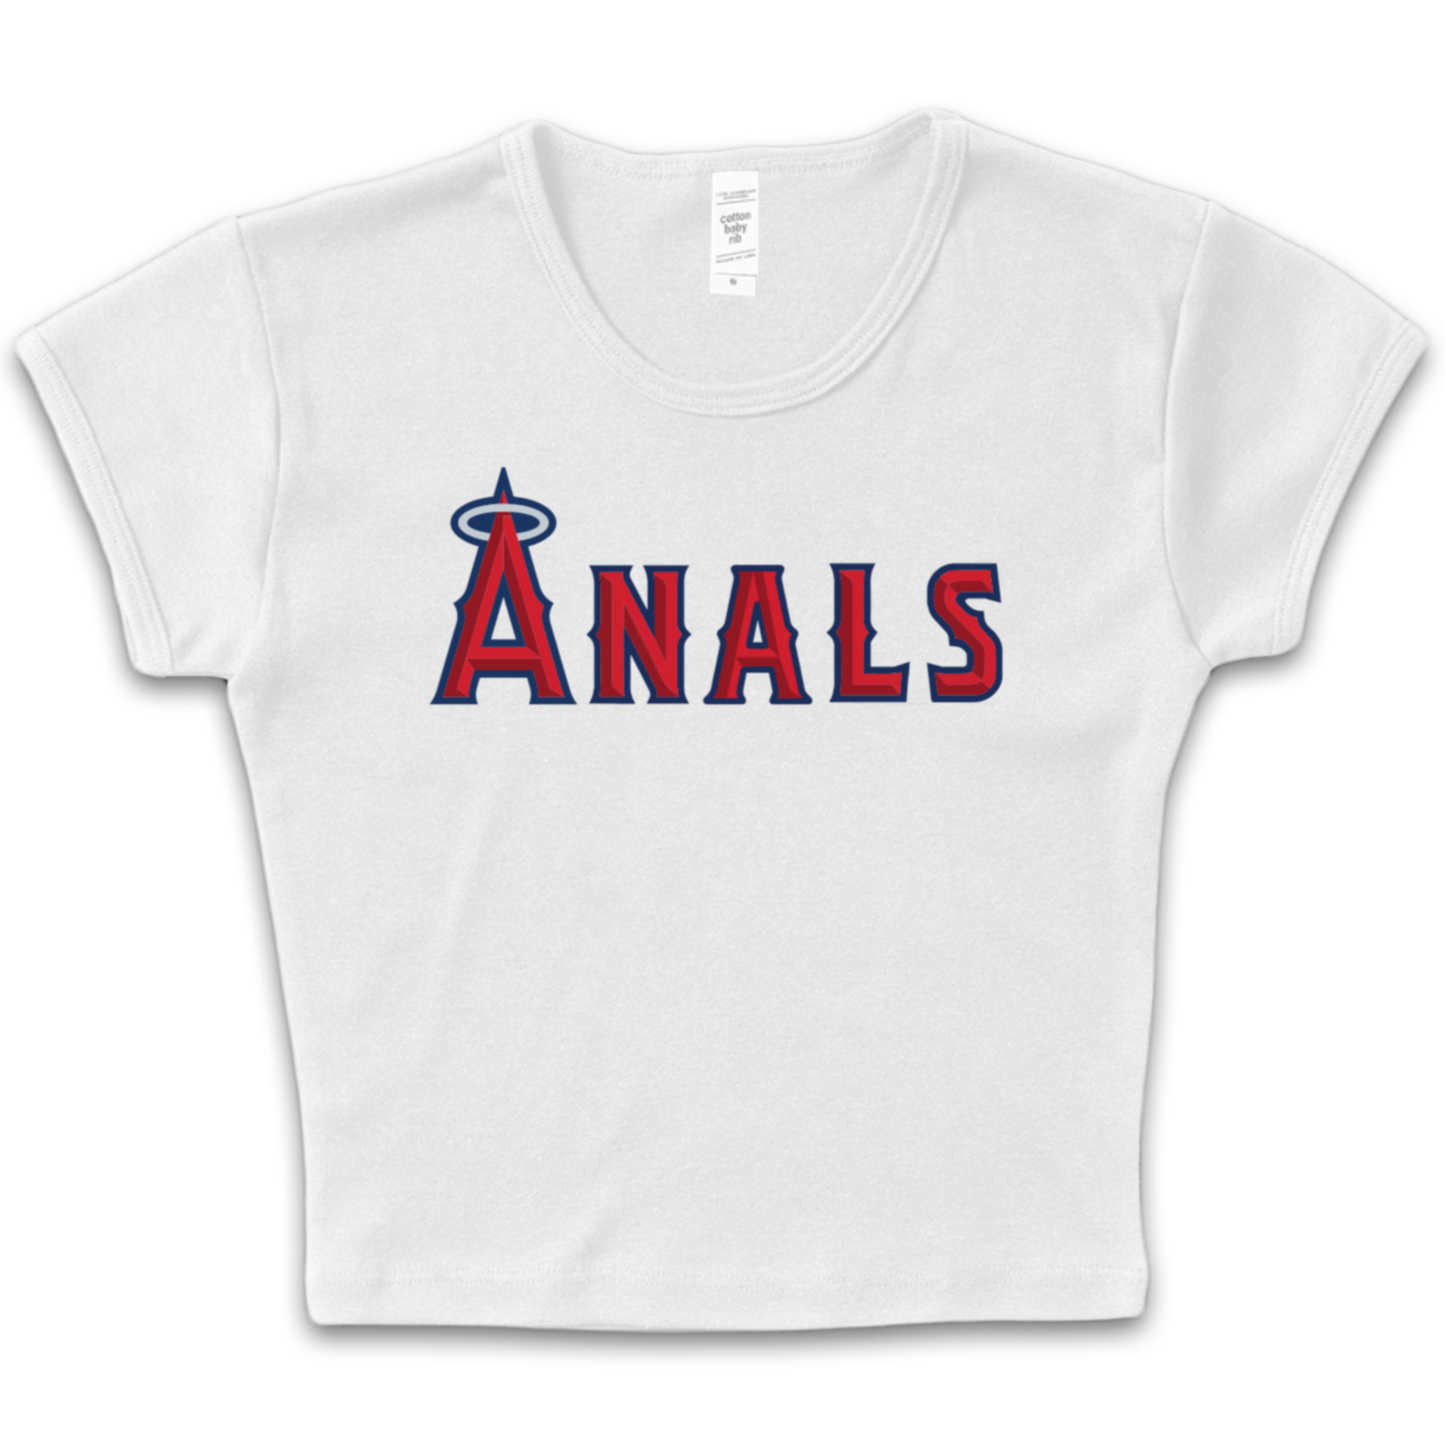 Los Angeles Anals Baby Tee